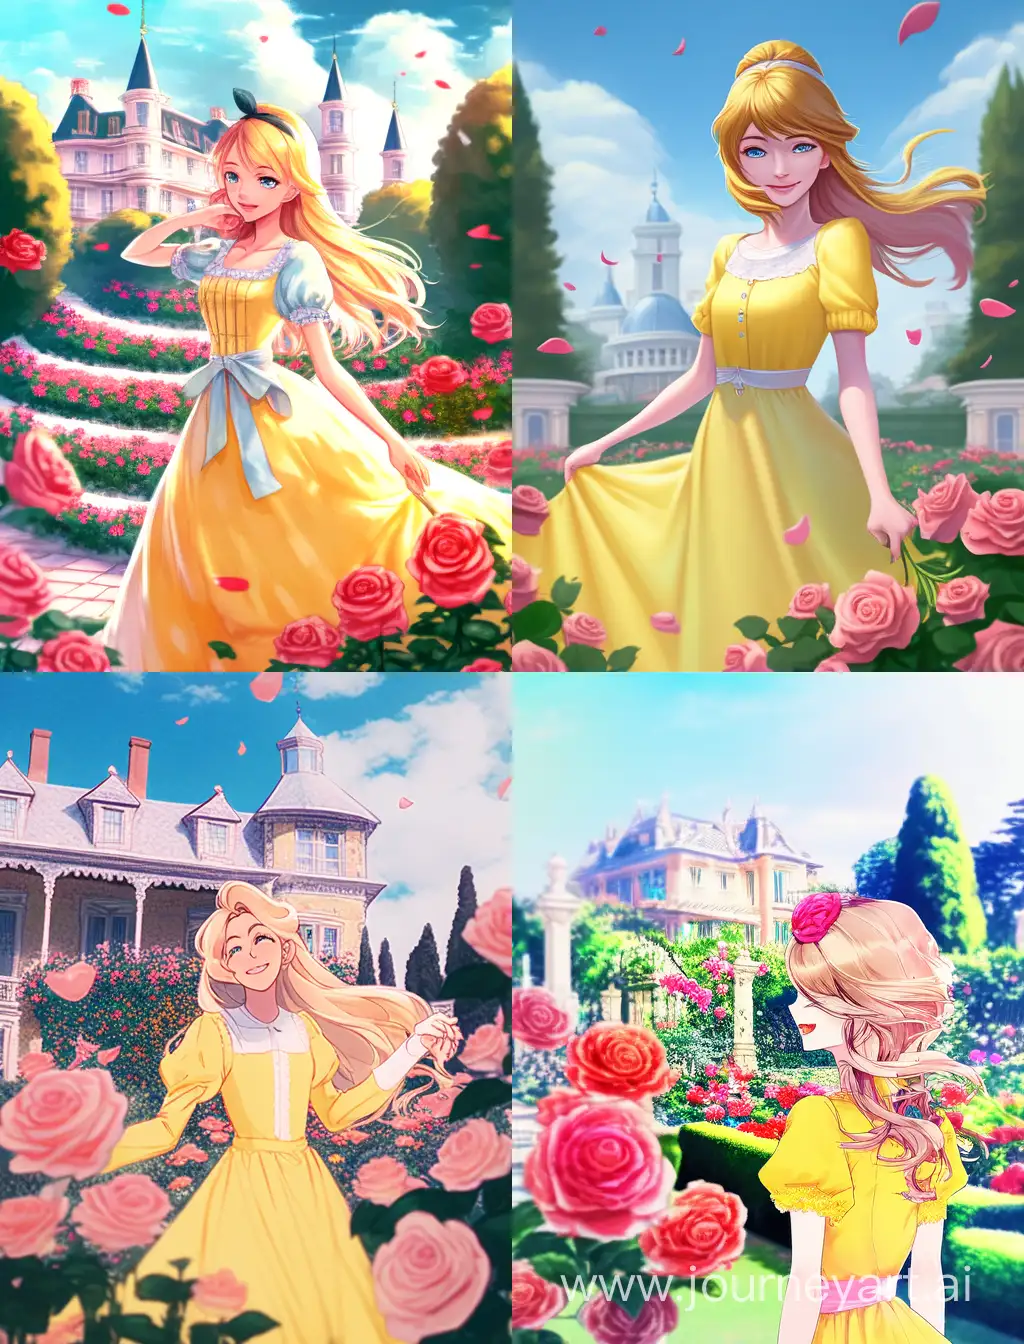 Cheerful-Girl-in-Yellow-Dress-Surrounded-by-Blooming-Roses-in-a-Pastel-Garden